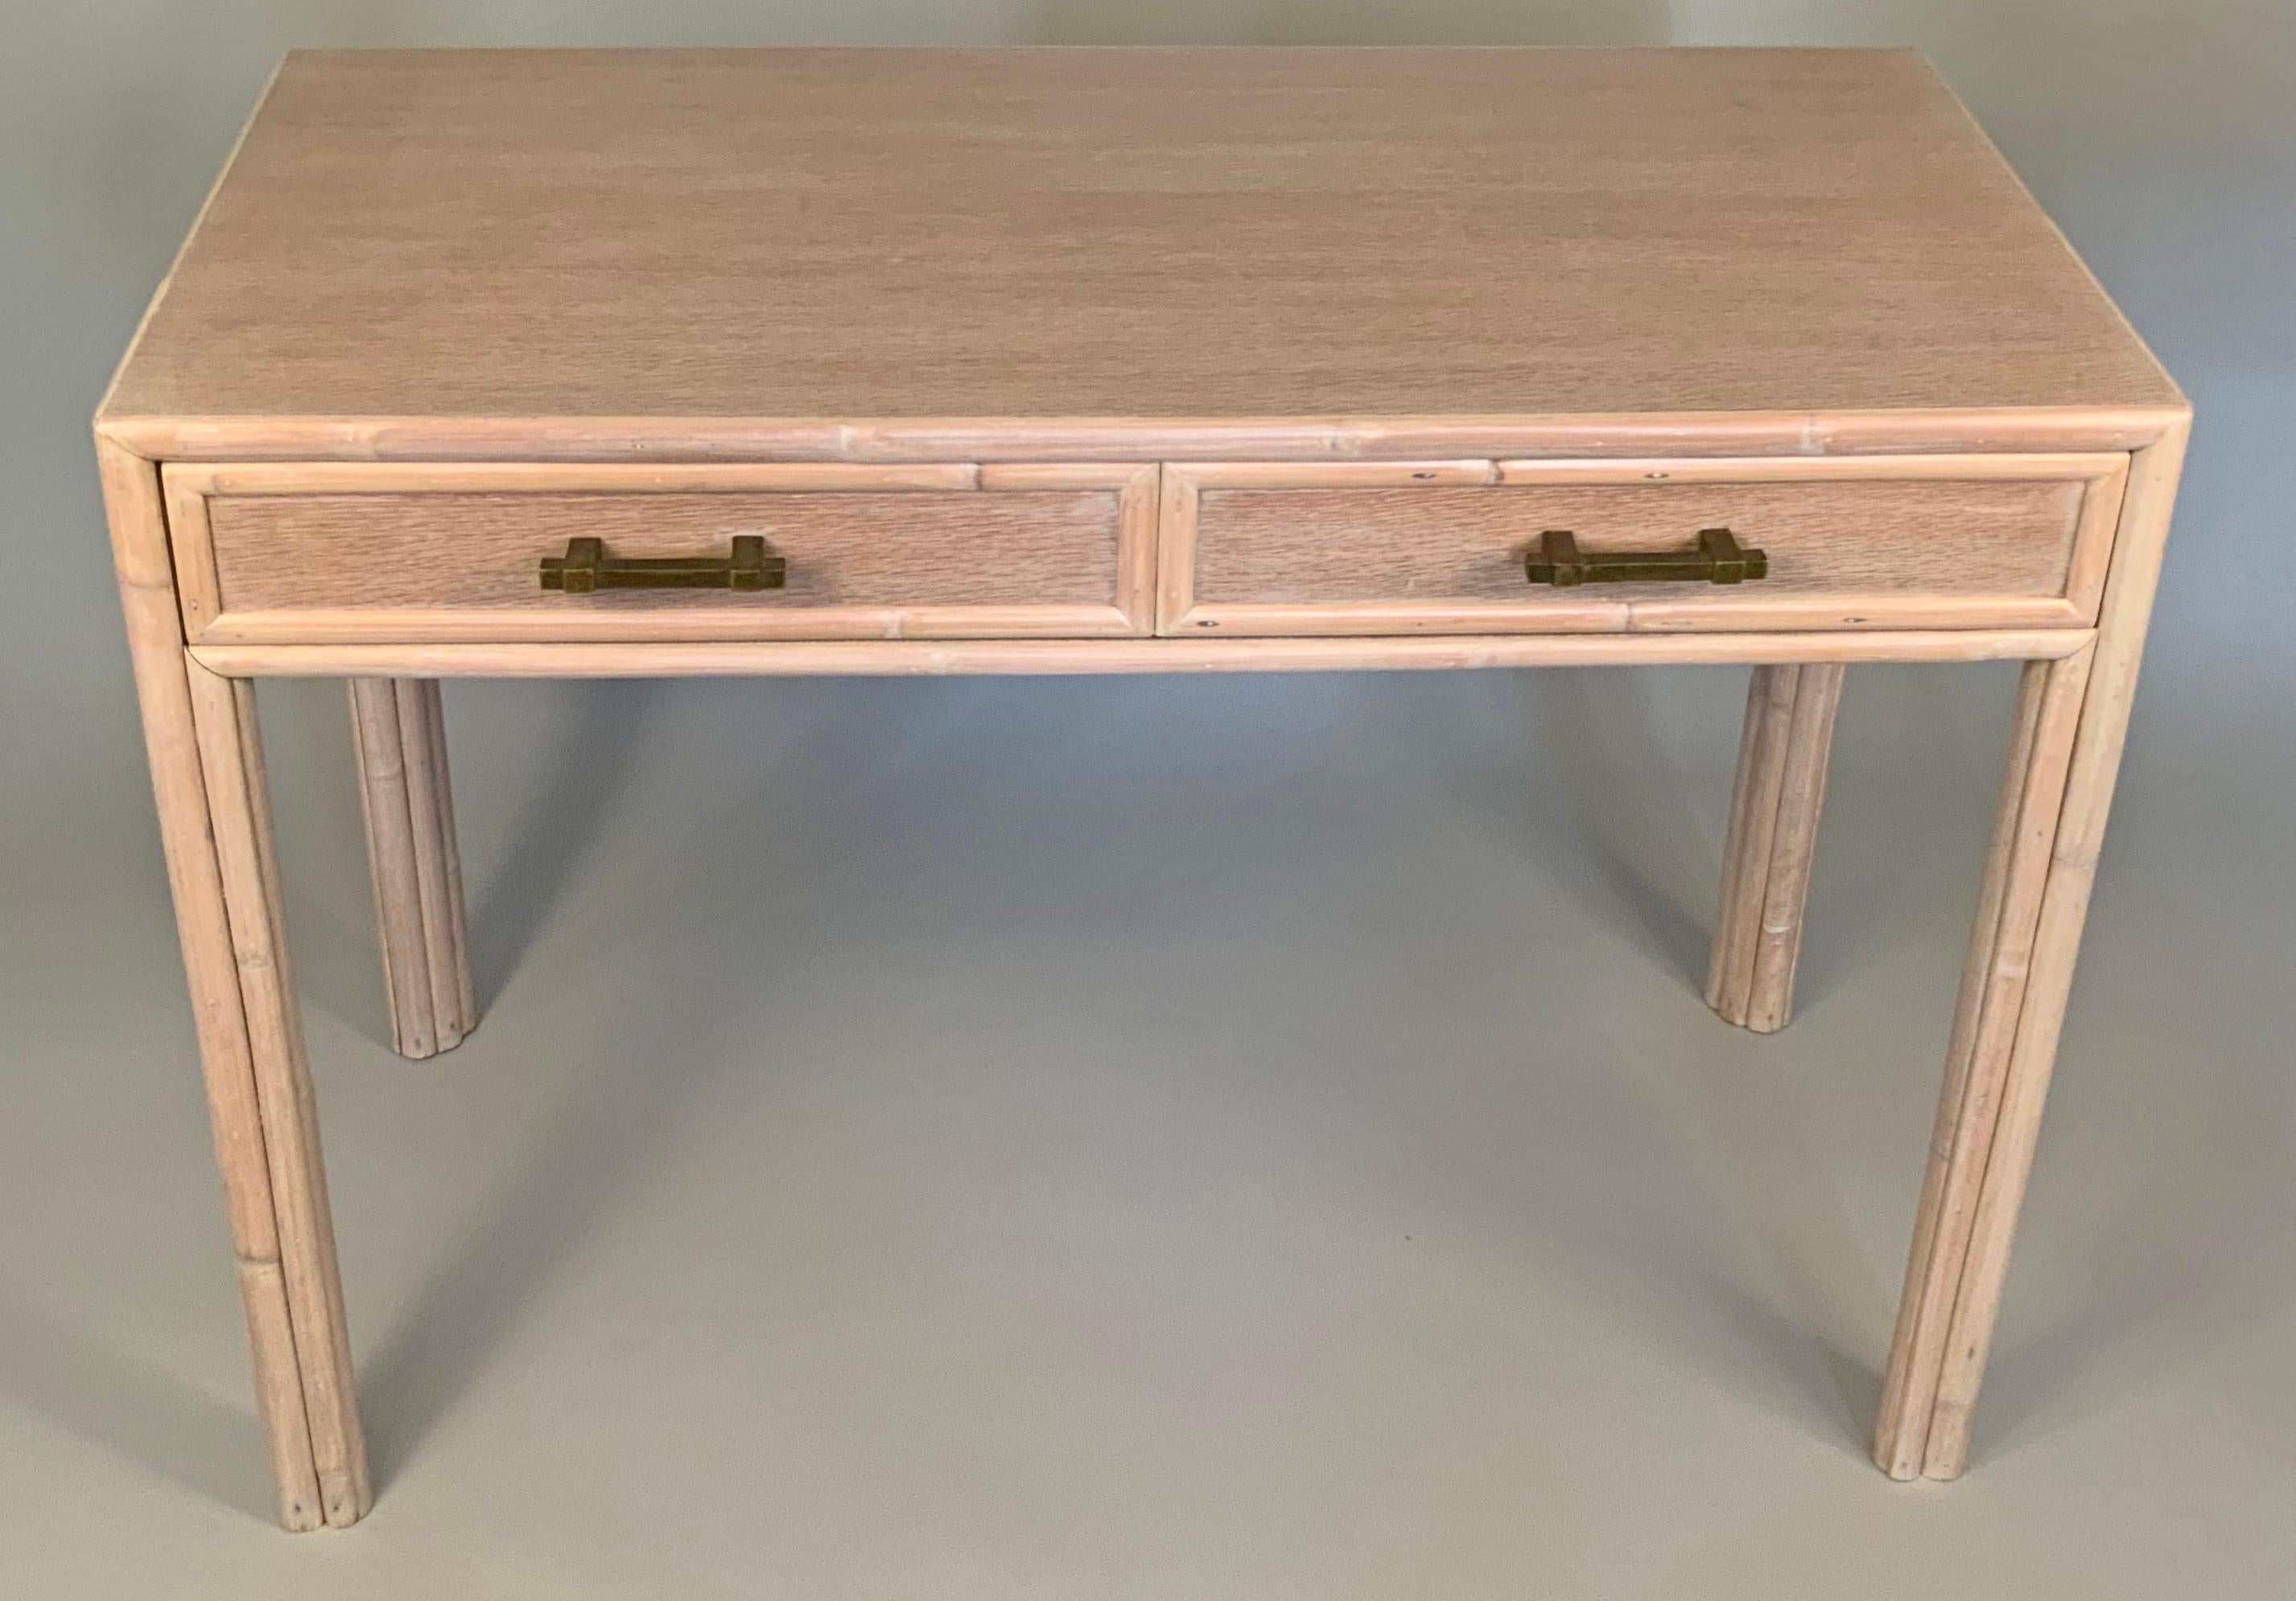 A beautiful 1970s writing desk by McGuire, with a very nice Cerused oak finish and rattan trim, with patinated brass drawer hardware. Wonderful details and scale.